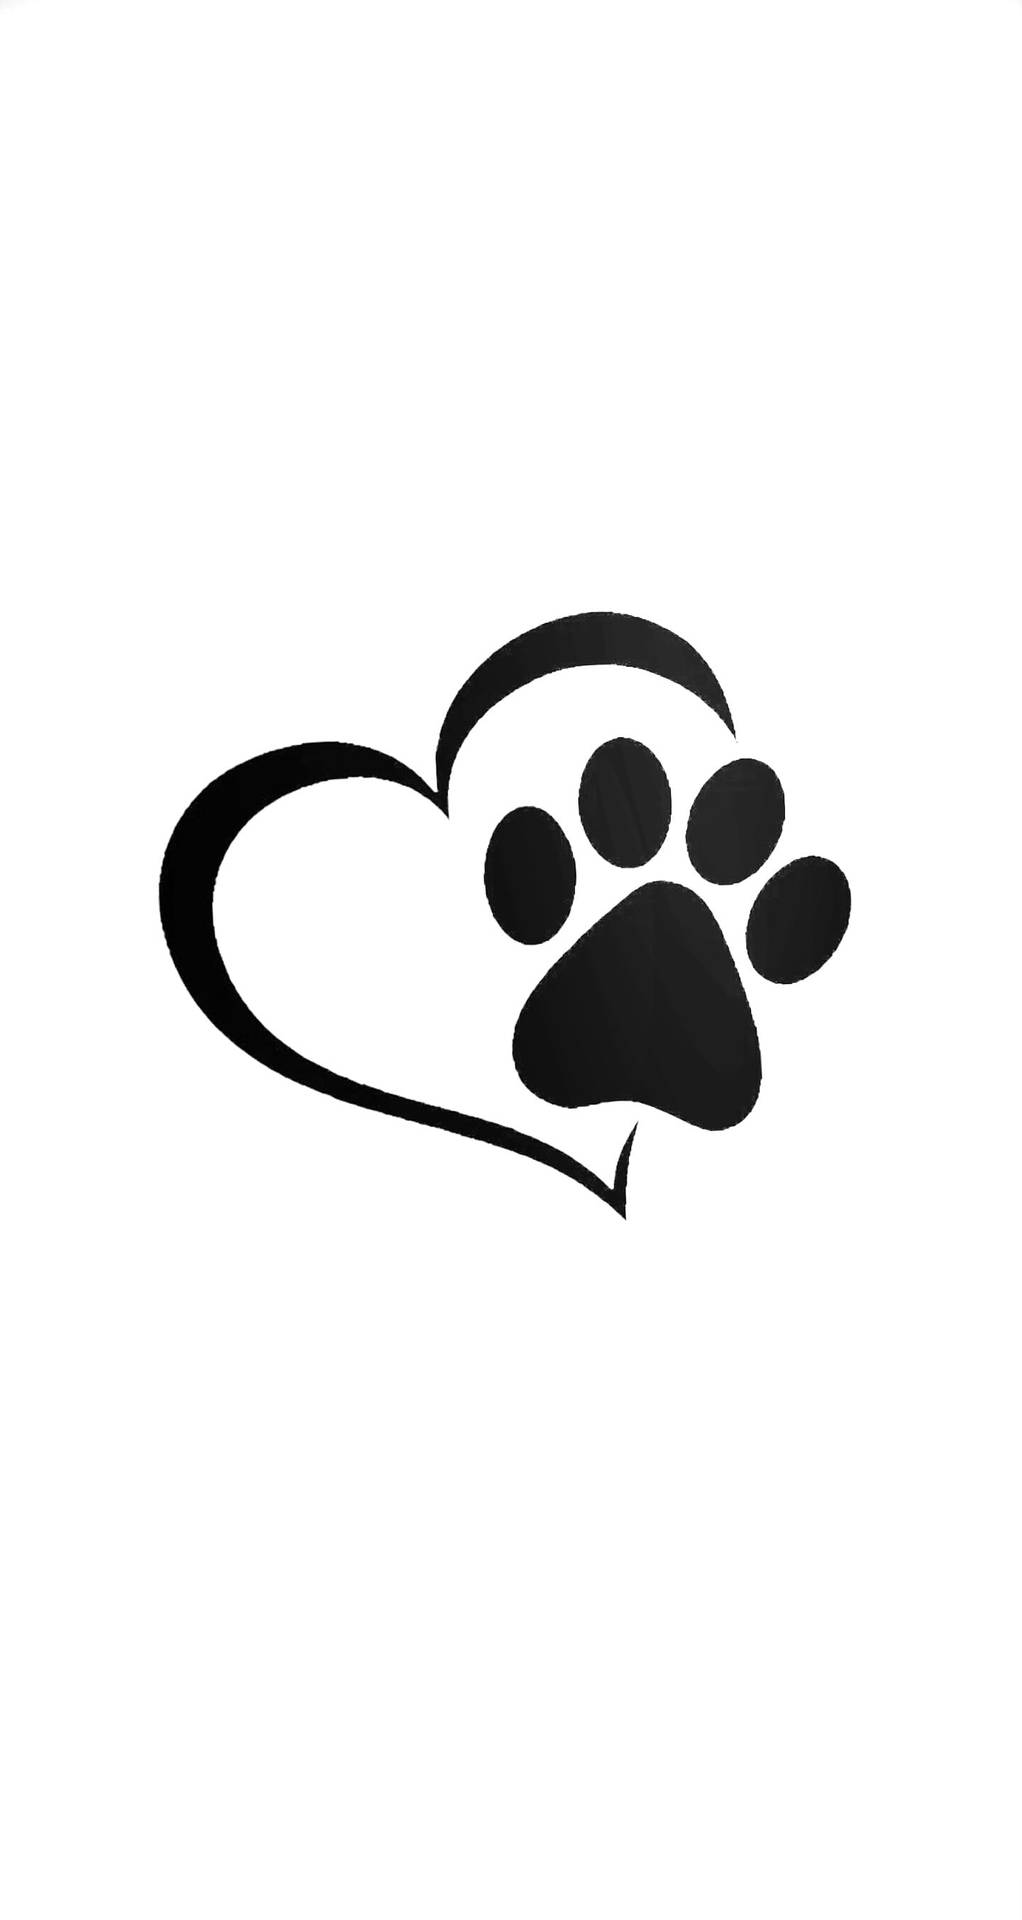 Black And White Heart Paw Print